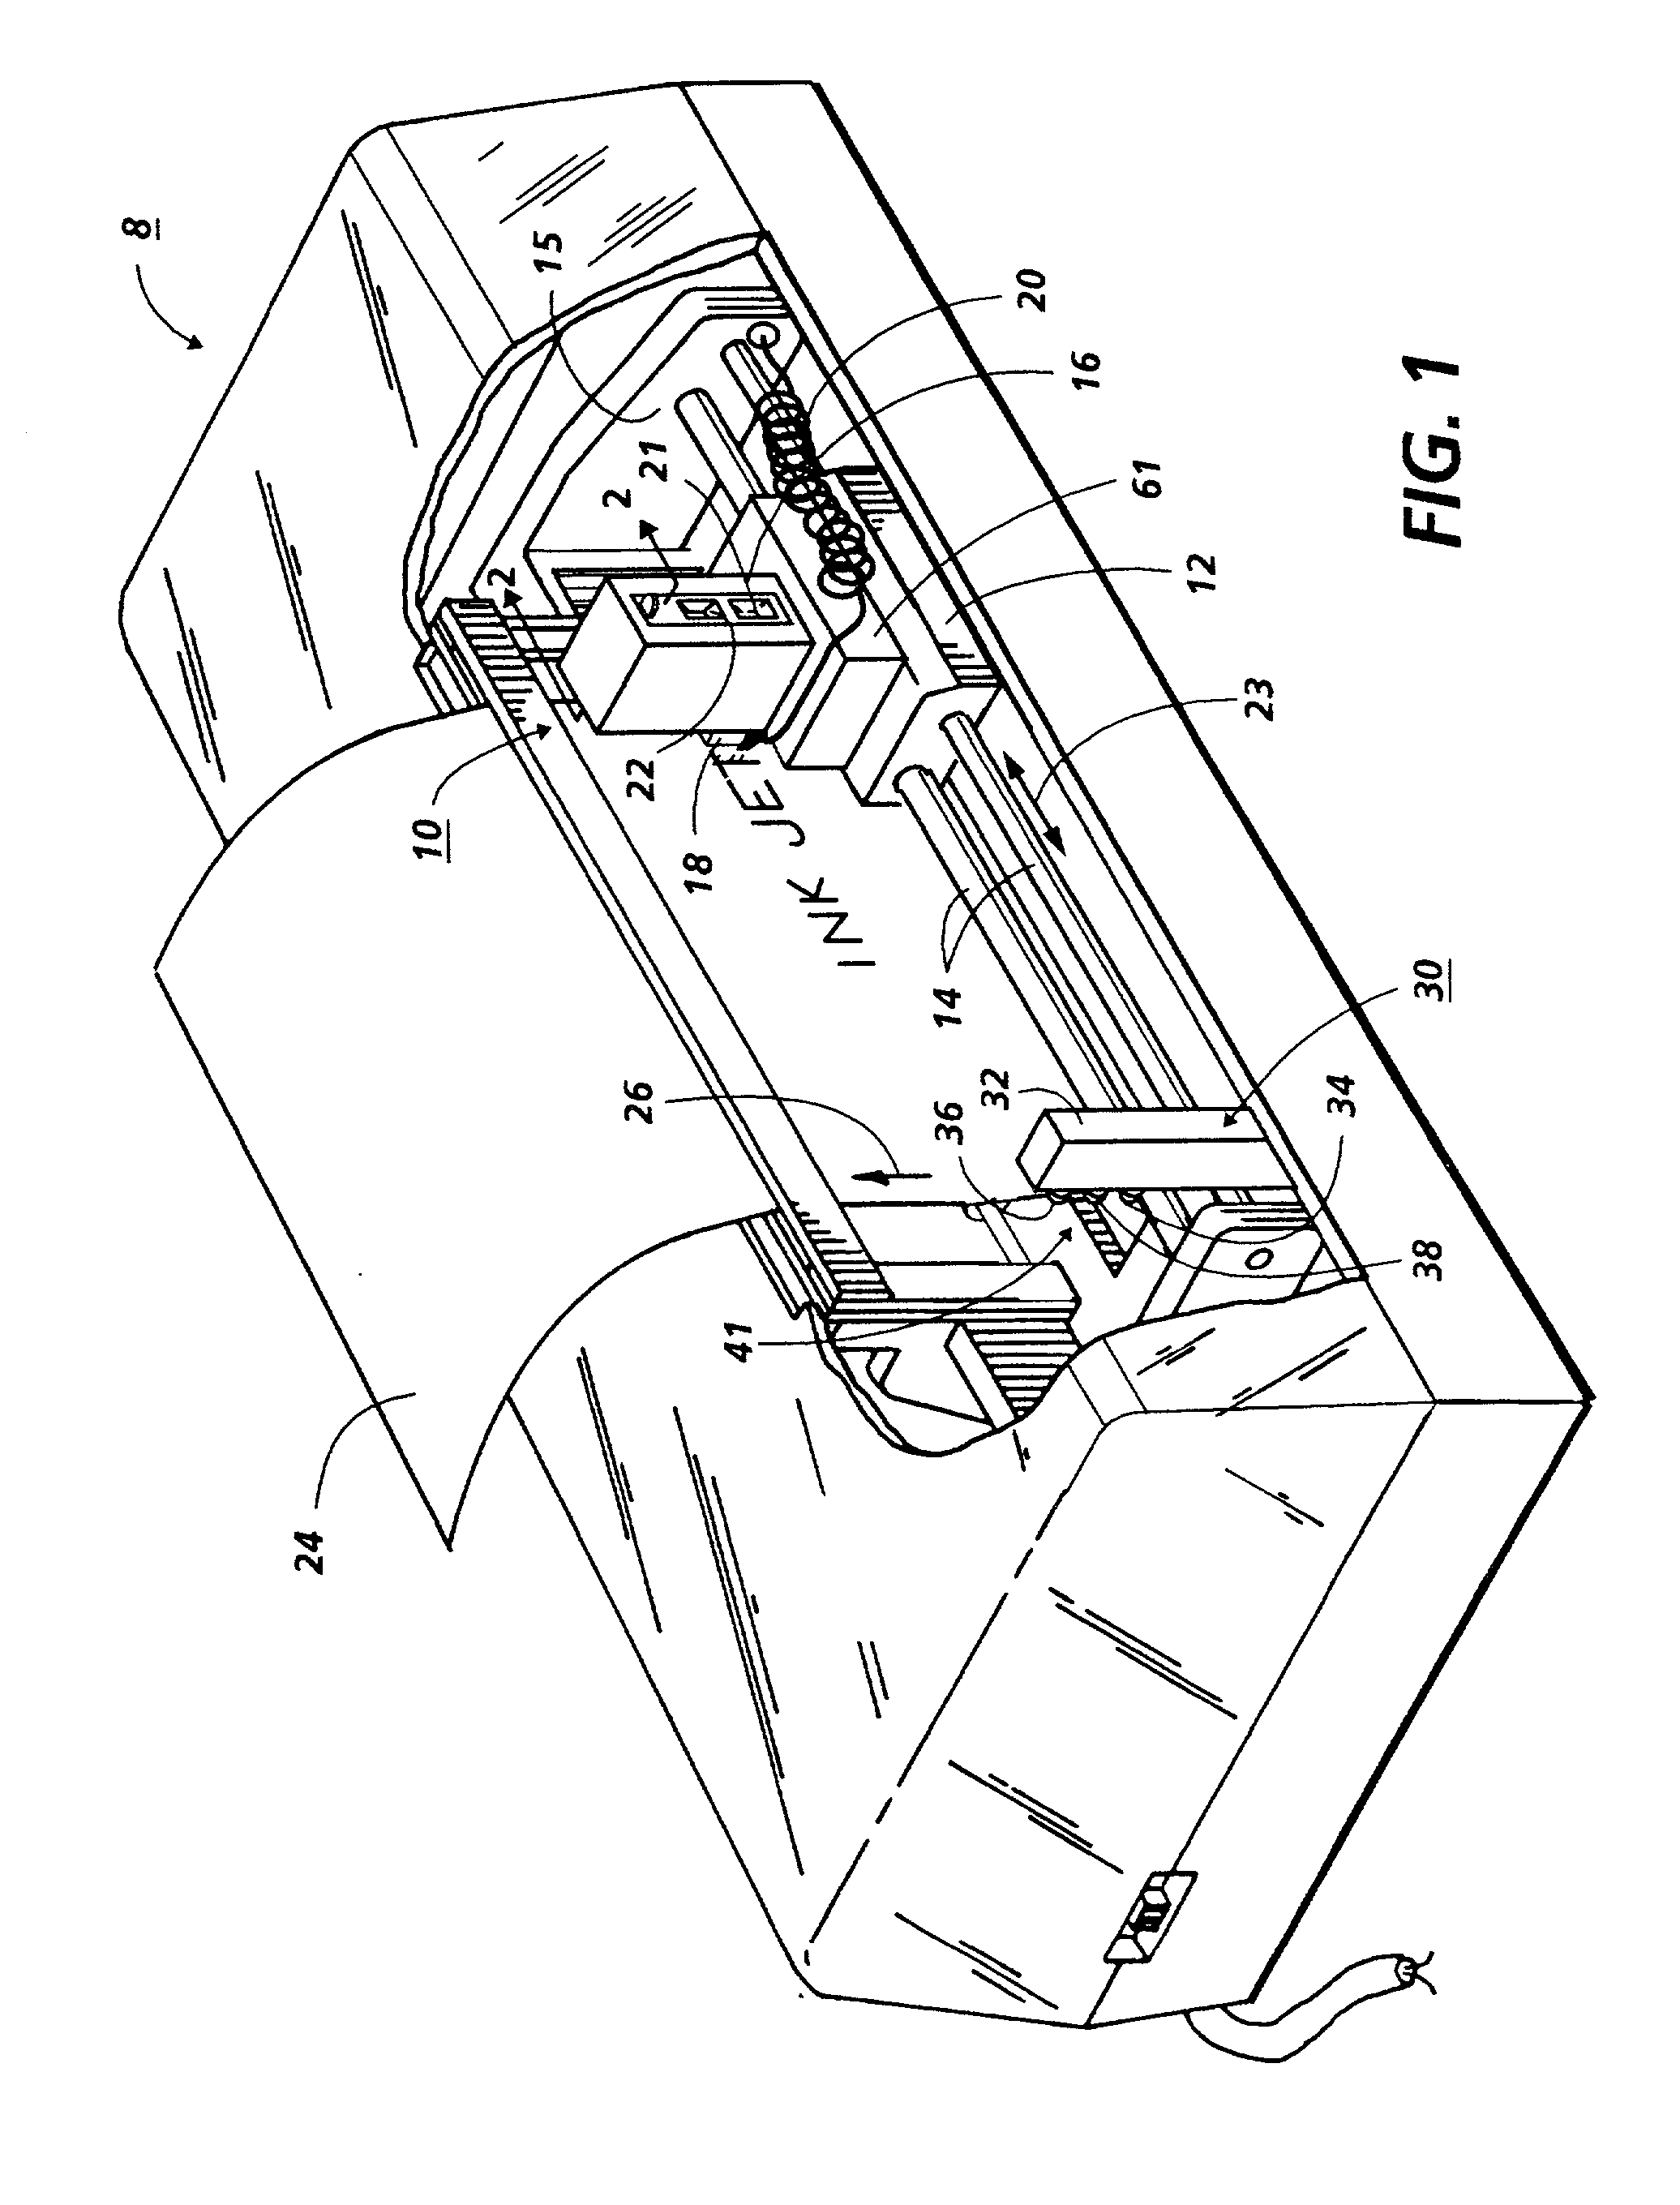 Sensing system for detecting presence of an ink container and level of ink therein